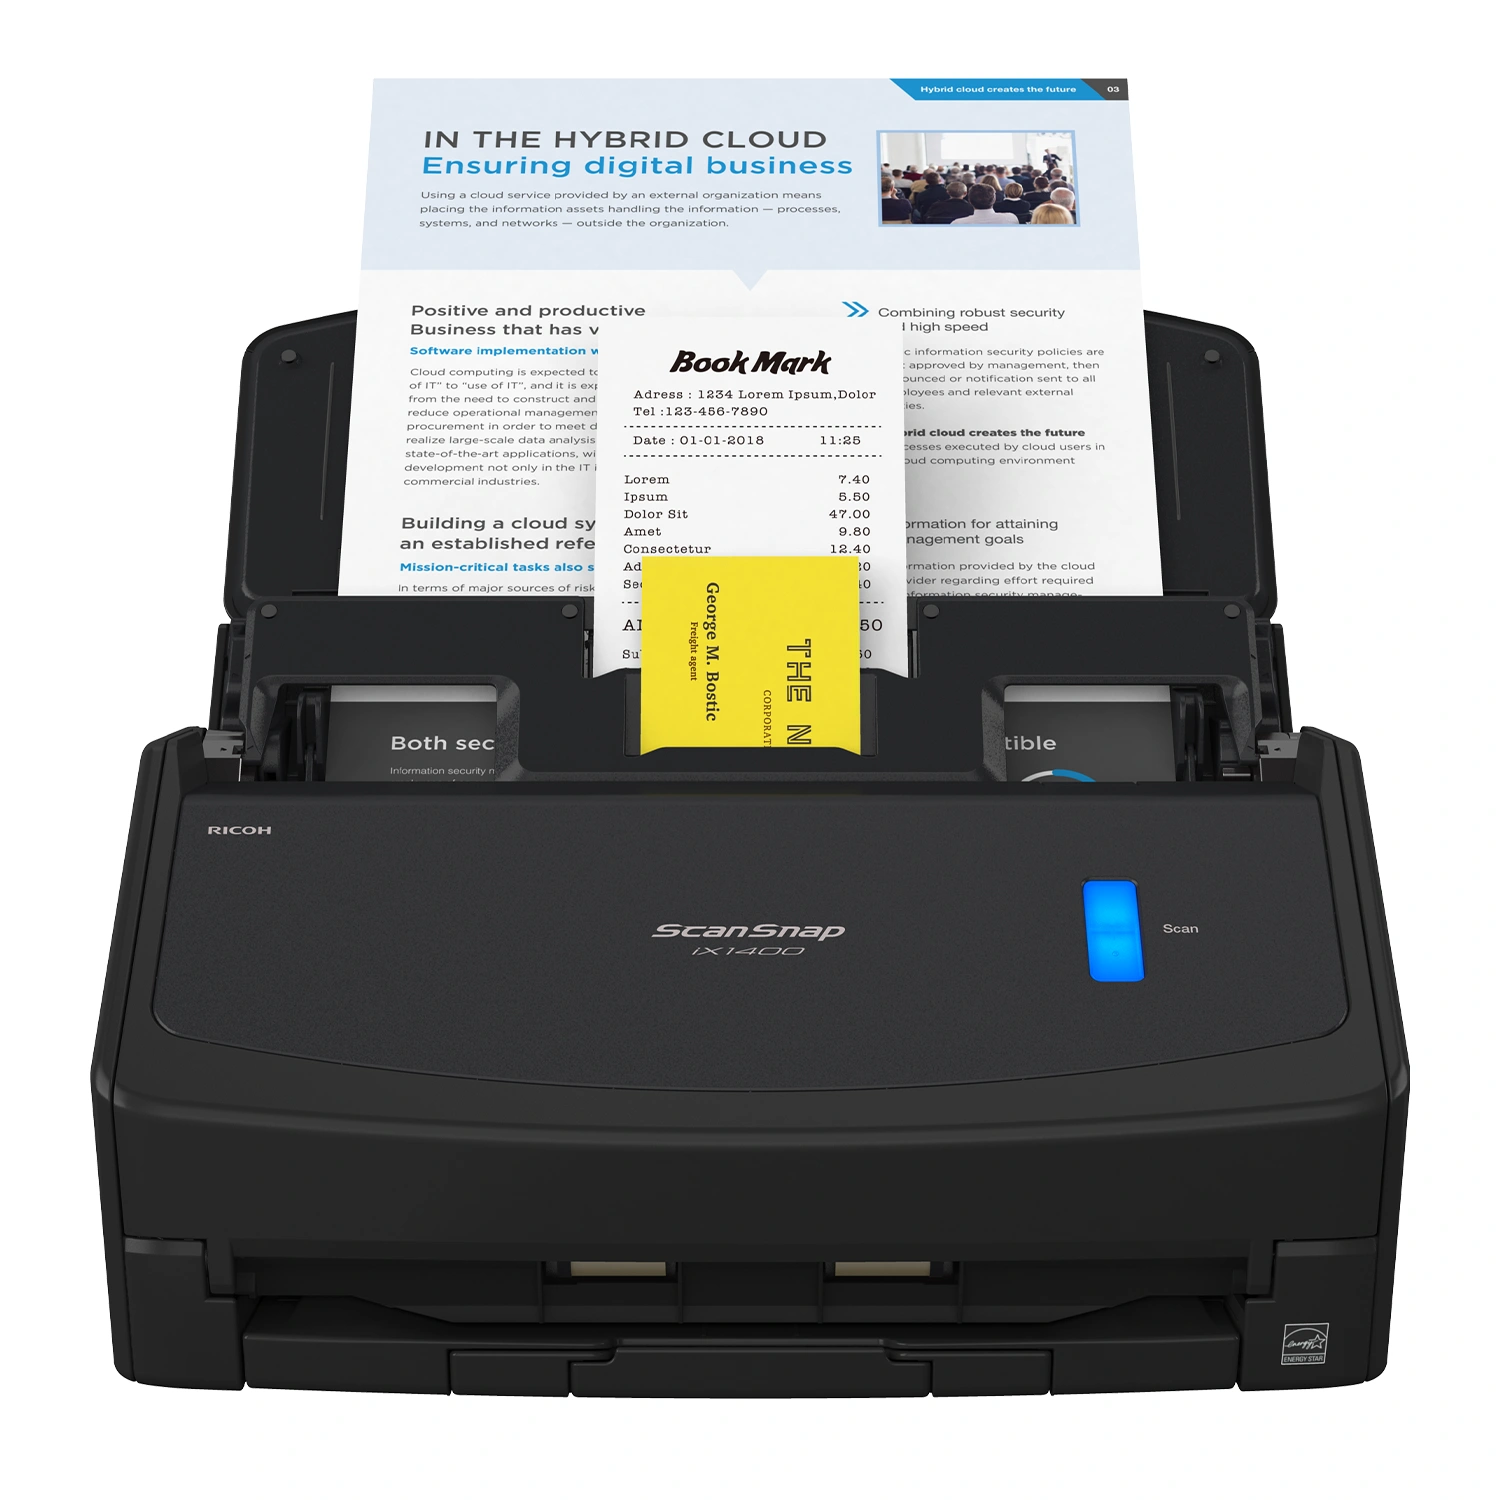 A ScanSnap iX1400 scanner in black shown with documents feeding from the top